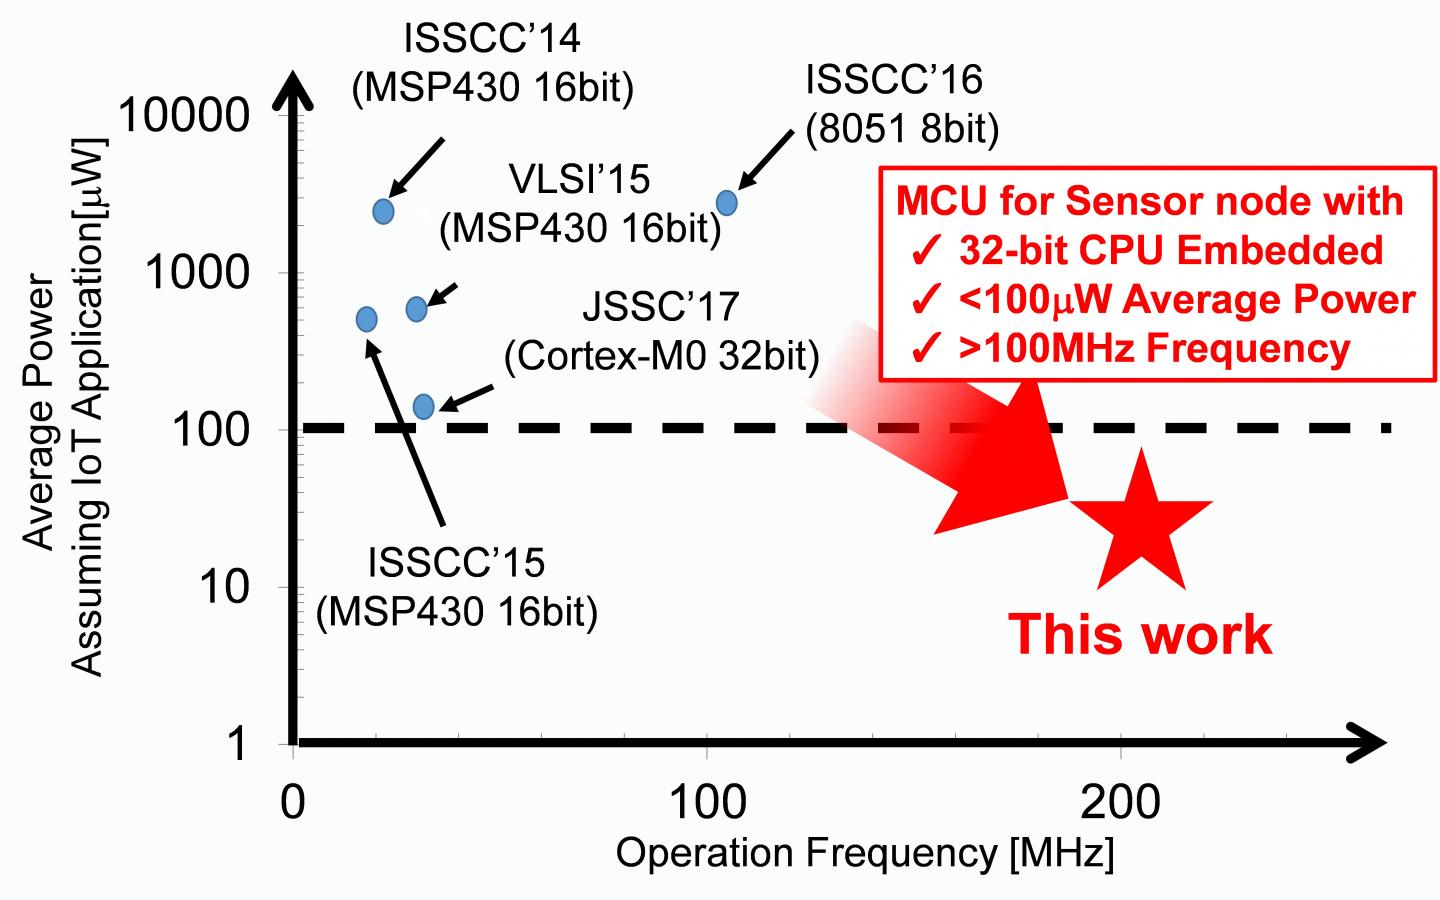 Development of nonvolatile spintronics-based 50μW microcontroller unit operating at 200MHz